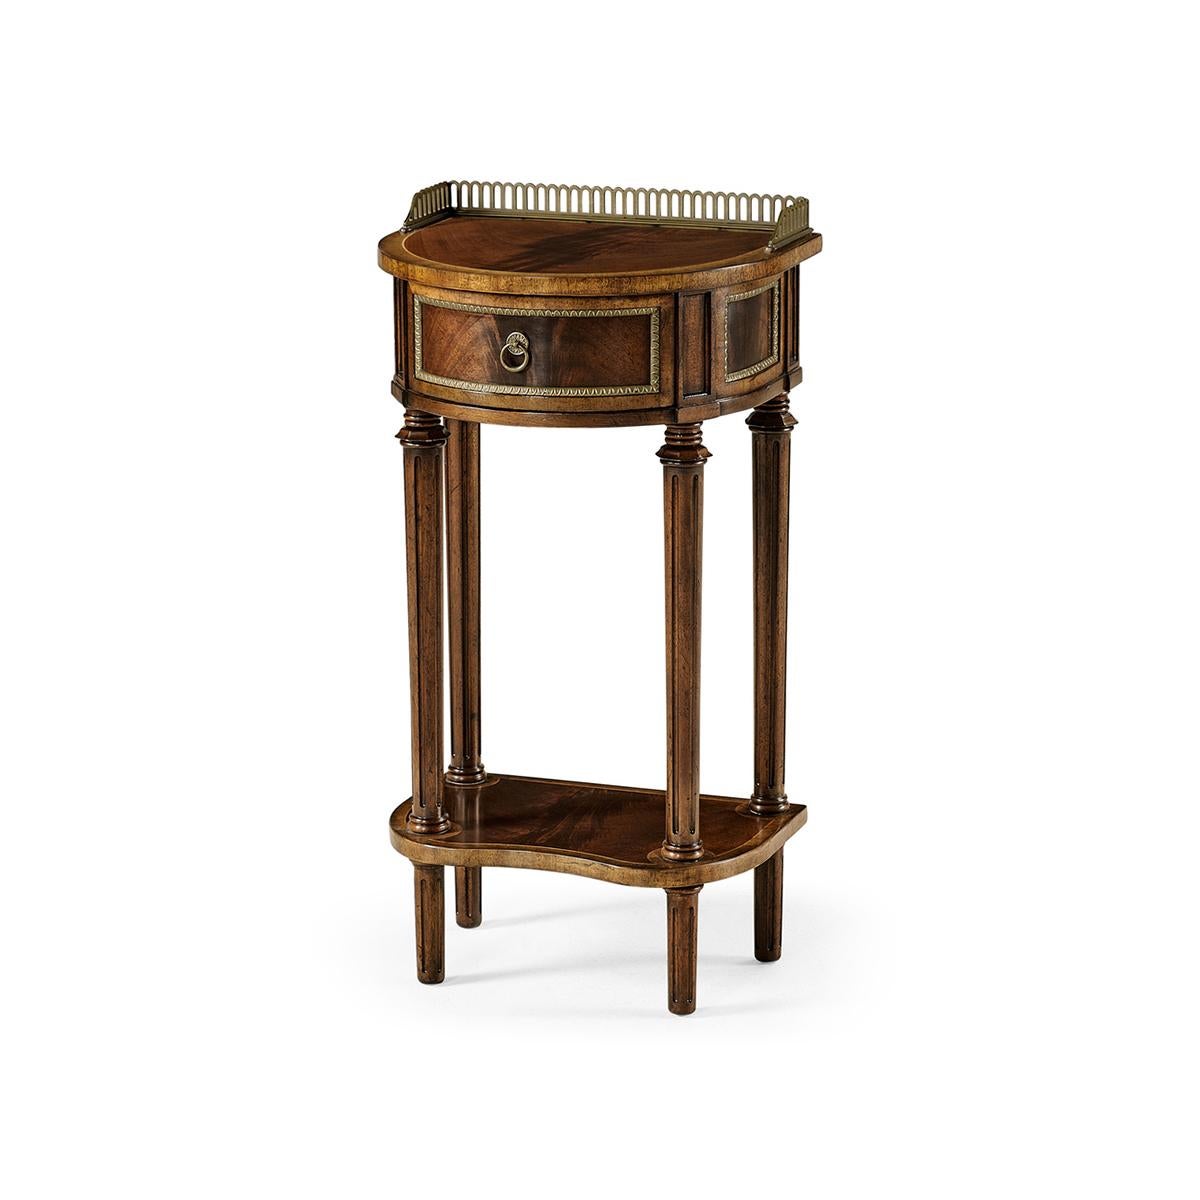 George III Style Mahogany demilune console table with a fine cast pierced antiqued brass gallery, single drawer with brass beading and a crossbanded shaped under-tier. Raised on turned, tapered, and fluted legs.

Dimensions: 16